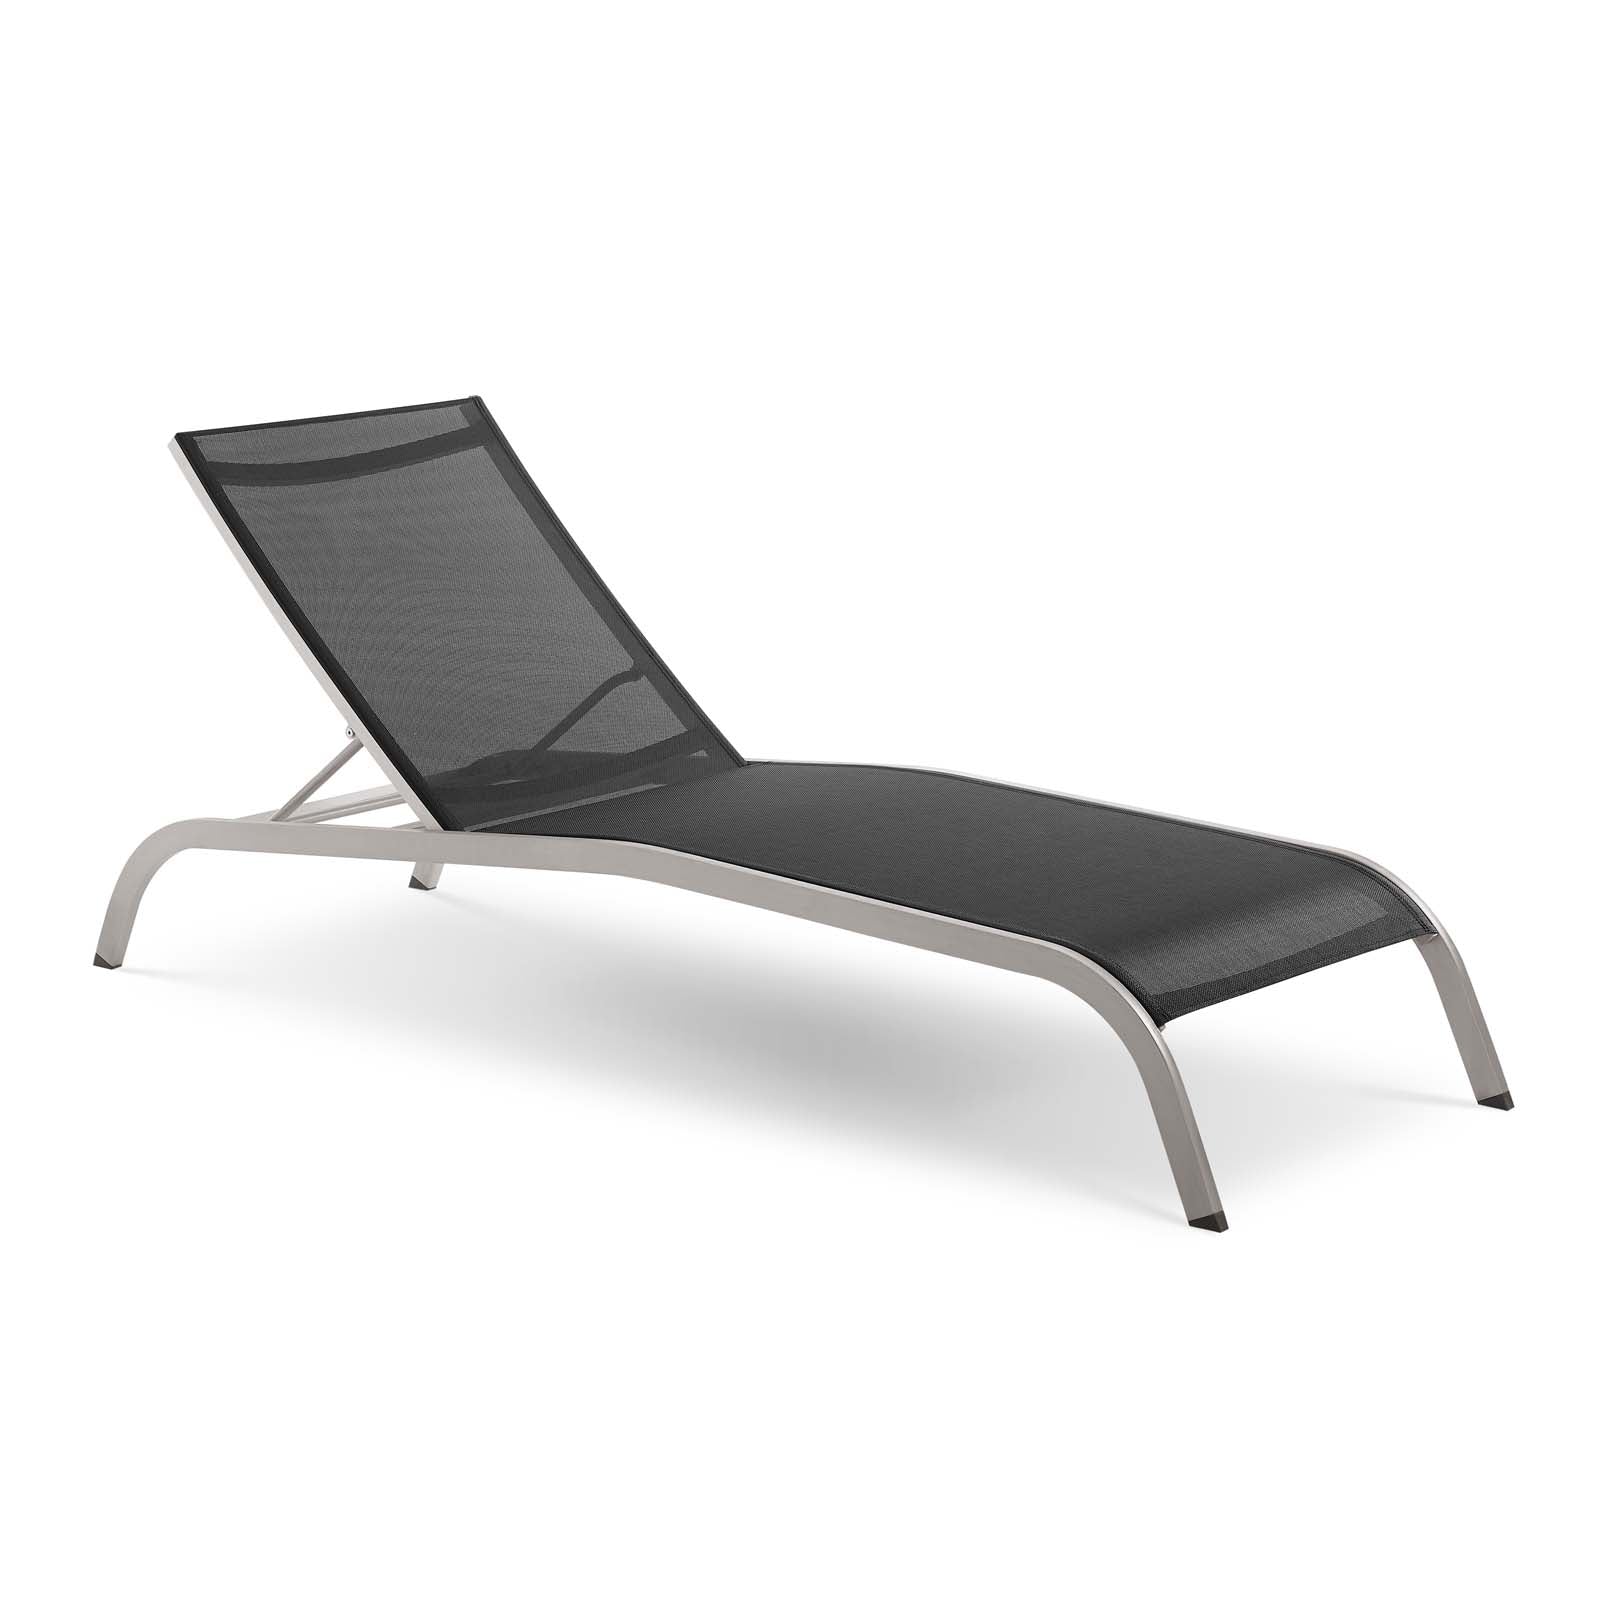 Modway Outdoor Loungers - Savannah Mesh Chaise Outdoor Patio Aluminum Lounge Chair Black